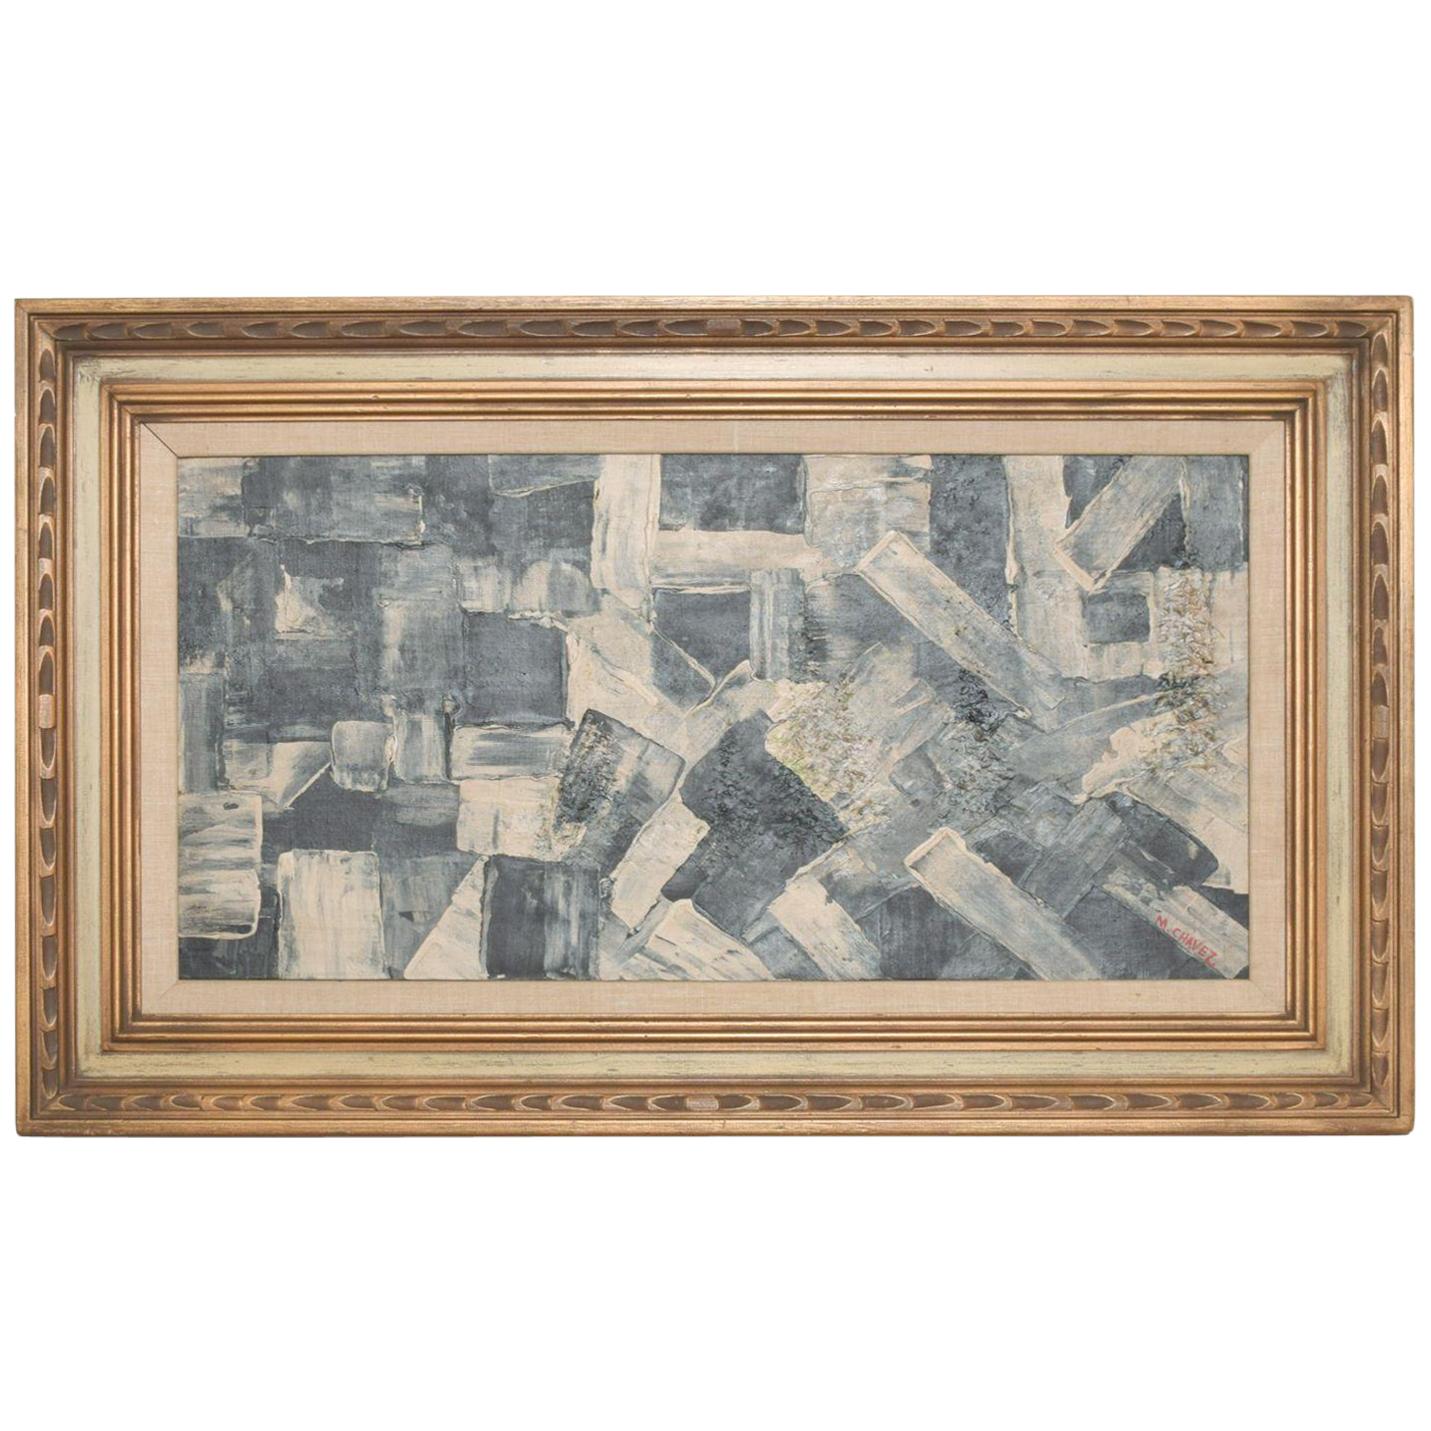 Modern Geometric Abstract Art on Canvas Board by M. Chavez